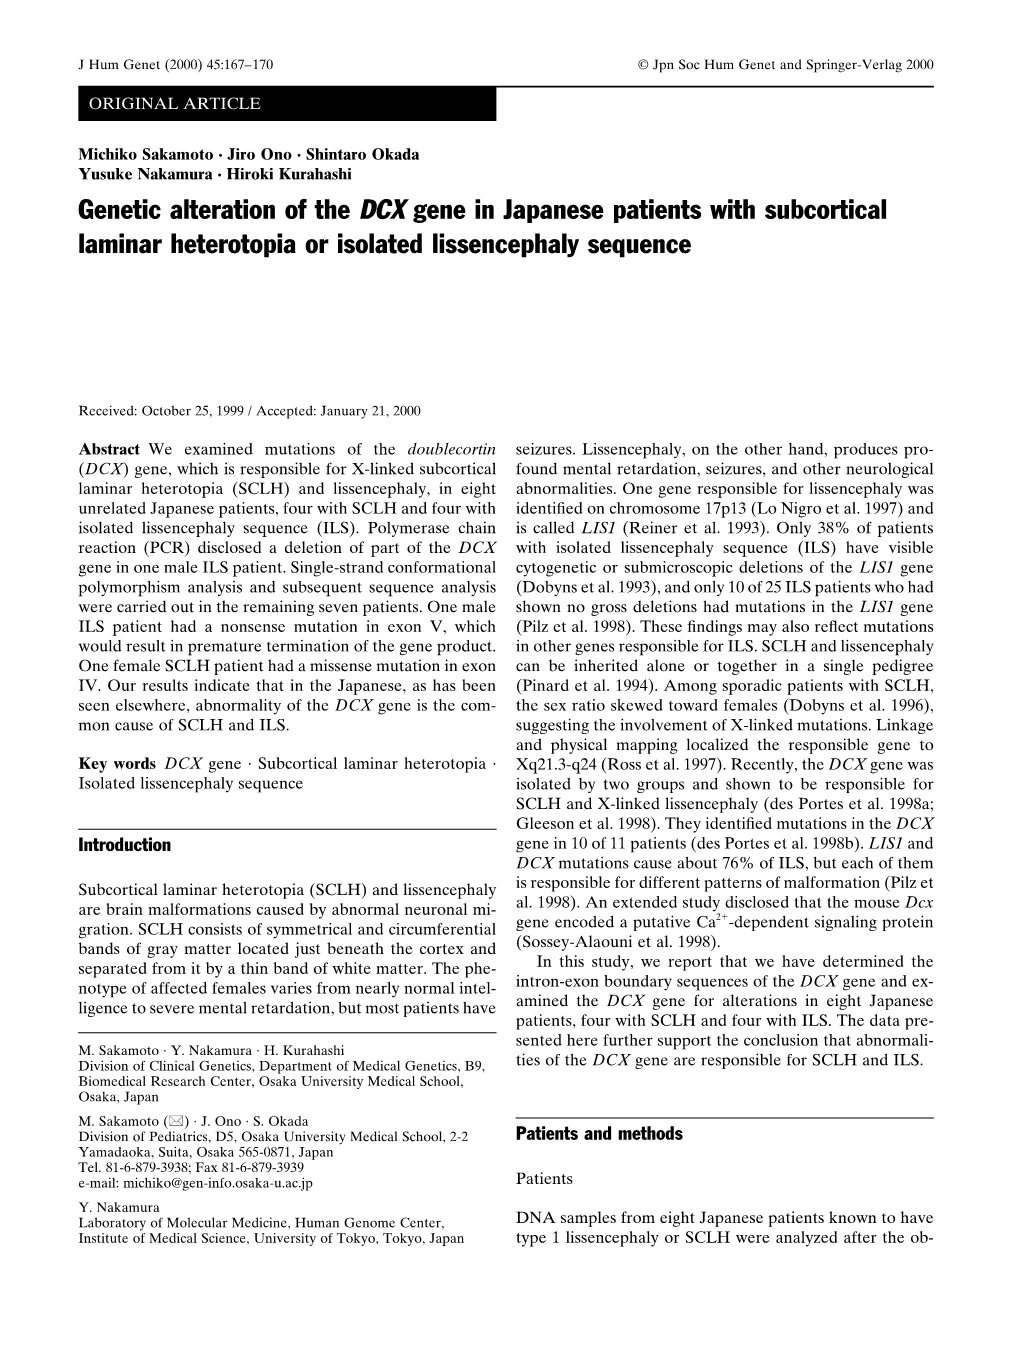 Genetic Alteration of the DCX Gene in Japanese Patients with Subcortical Laminar Heterotopia Or Isolated Lissencephaly Sequence